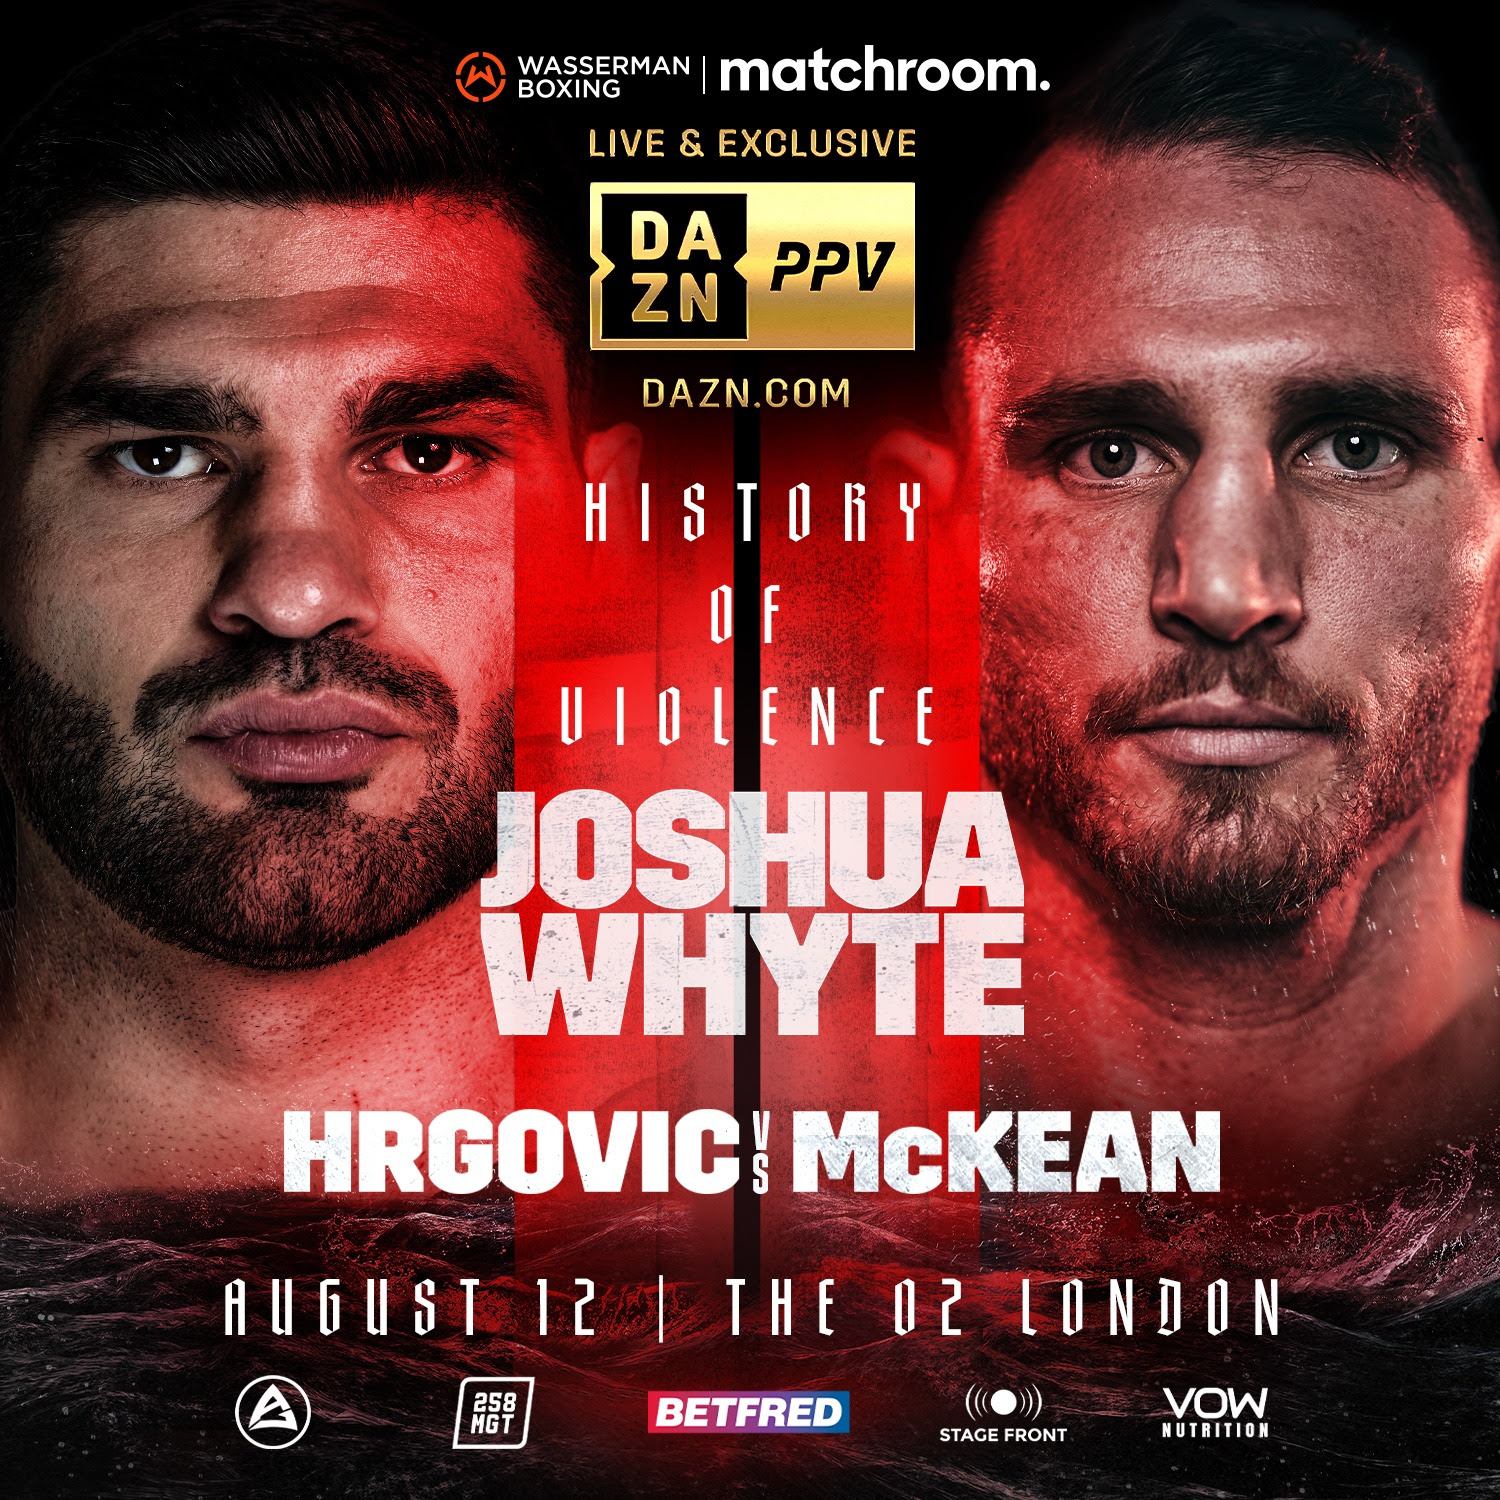 Hrgovic-McKean confirmed for Joshua-Whyte undercard, August 12 